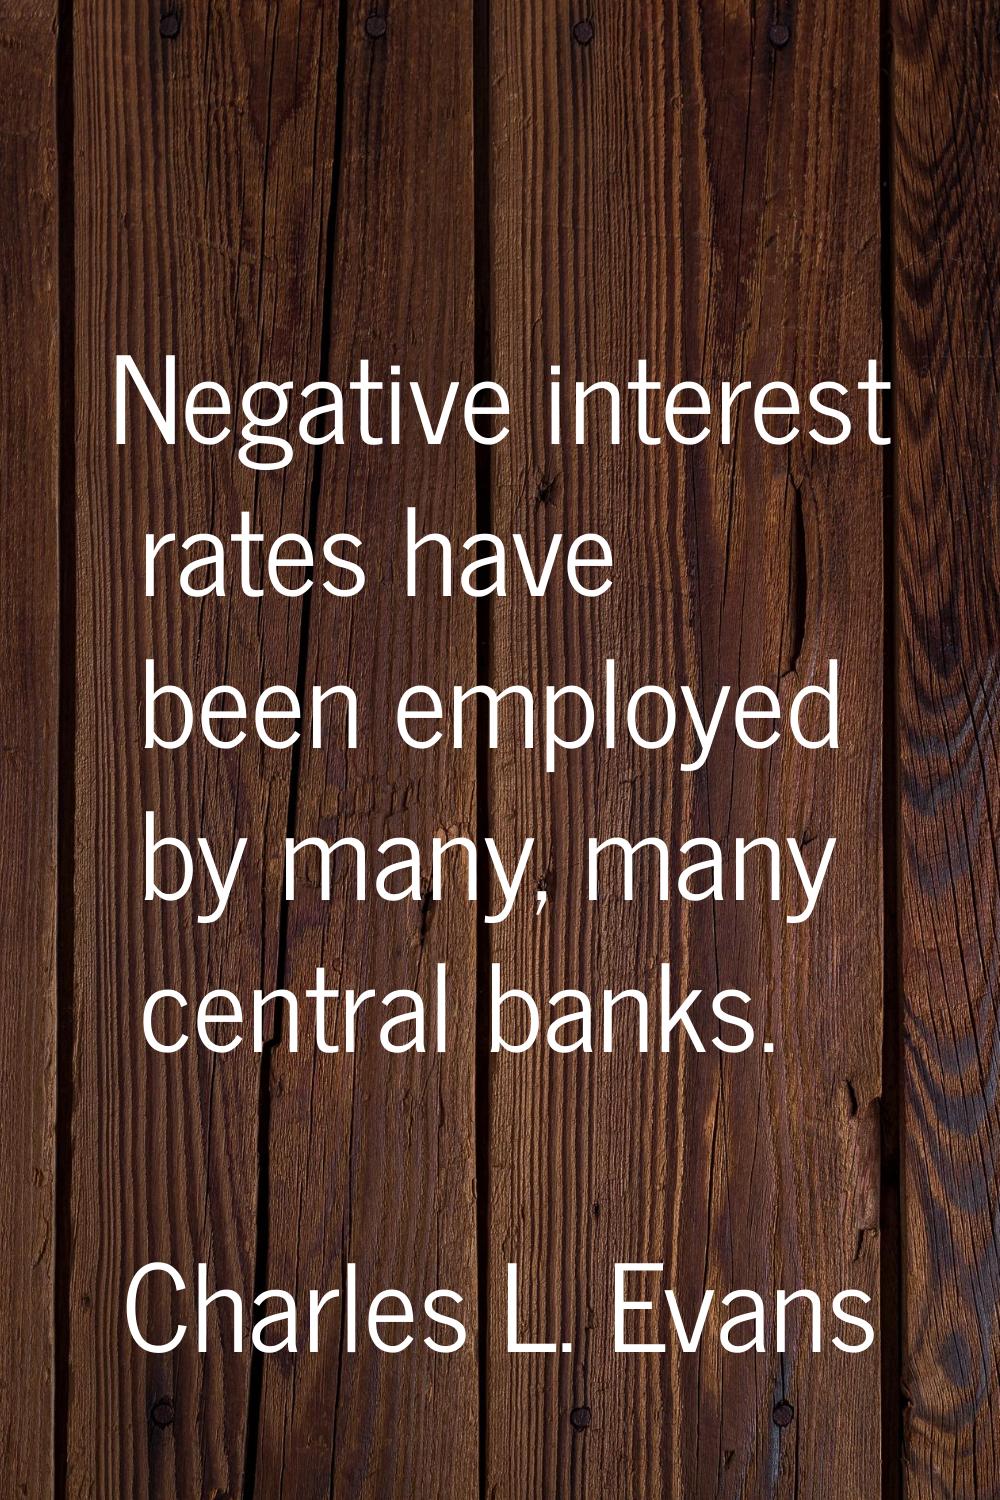 Negative interest rates have been employed by many, many central banks.